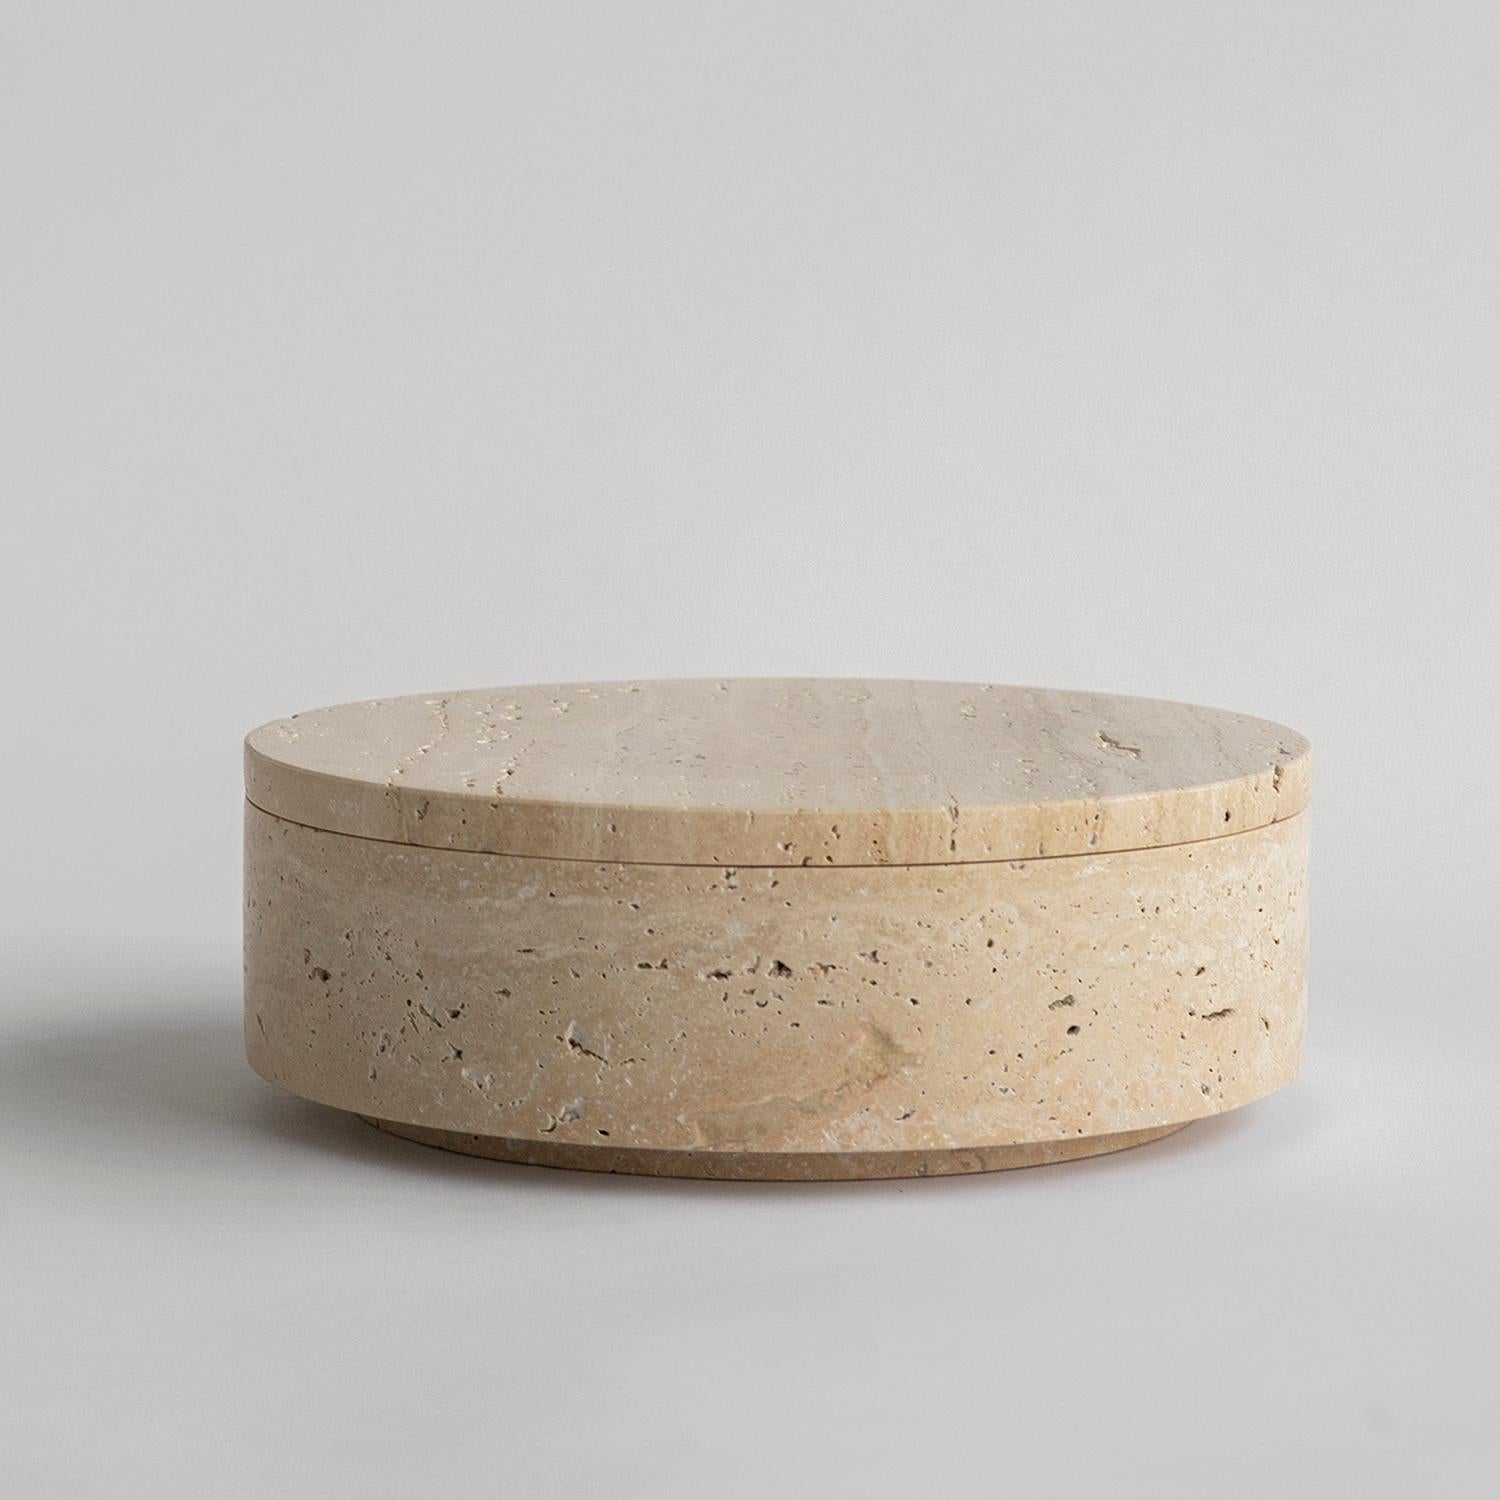 Stunning, aesthetic, timeless are words that can be used to describe this elegant and modern travertine bowl from Kiwano. Expertly crafted and finished by hand, our travertine vases are a study in sculptural simplicity. Natural variations in the